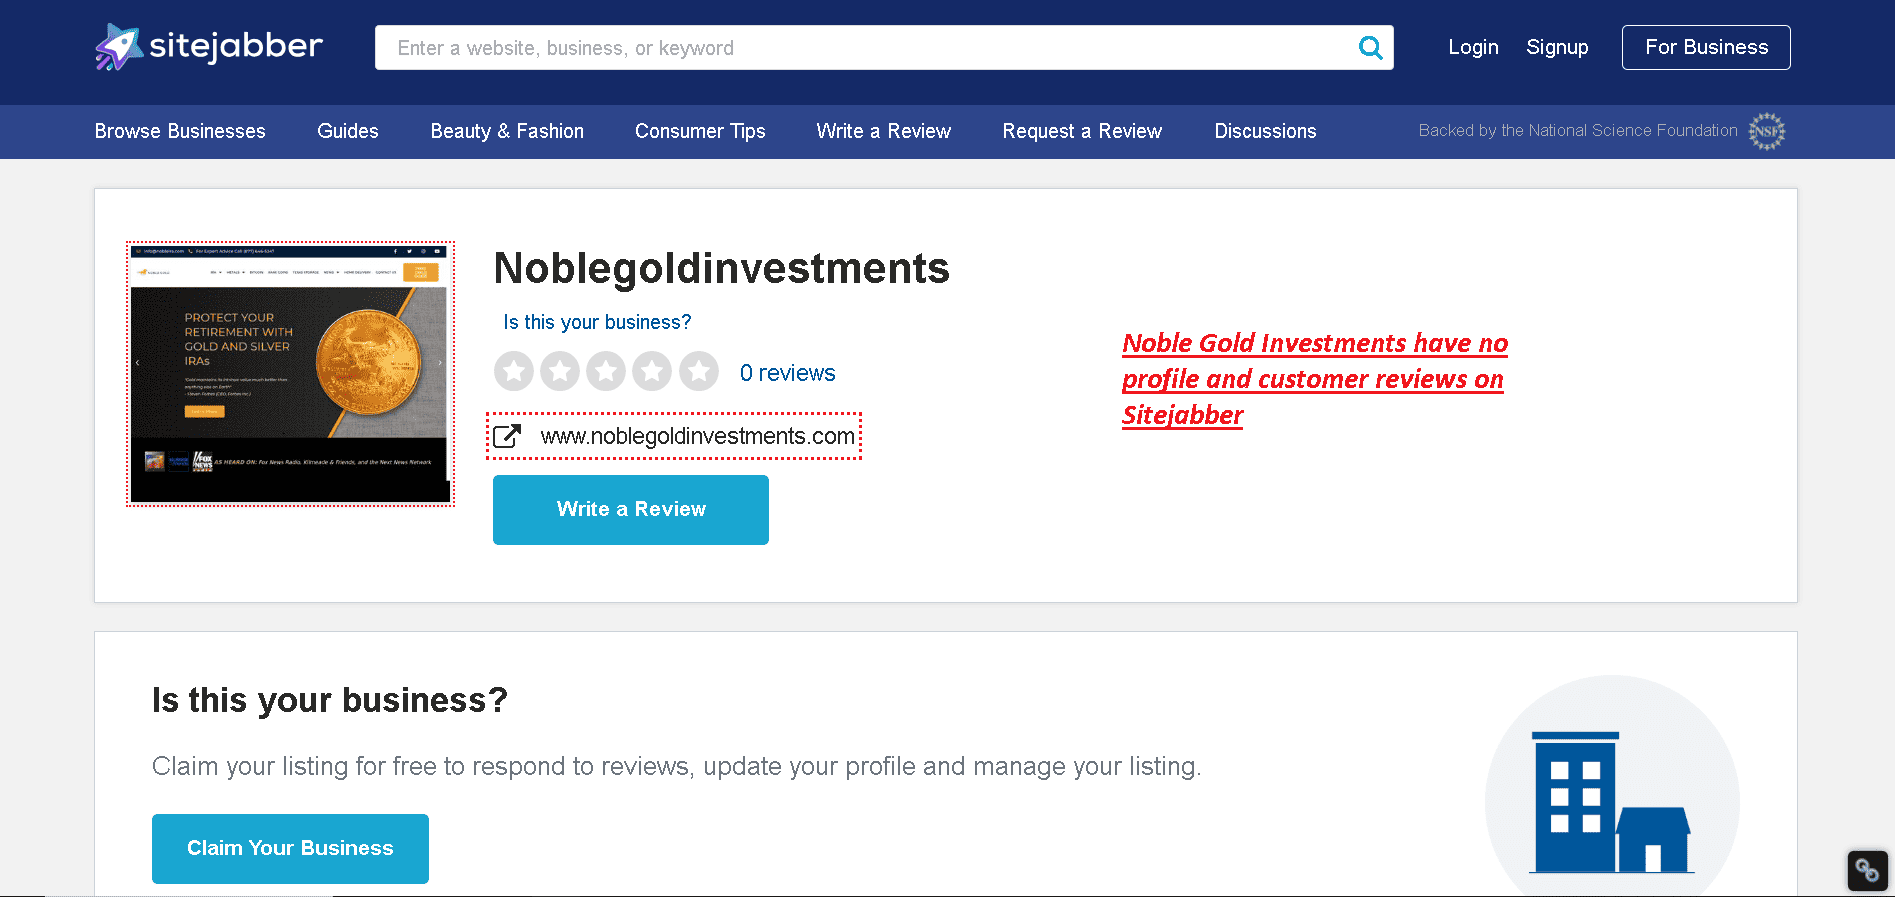 Noble Gold Investments have no profile and customer reviews on Sitejabber